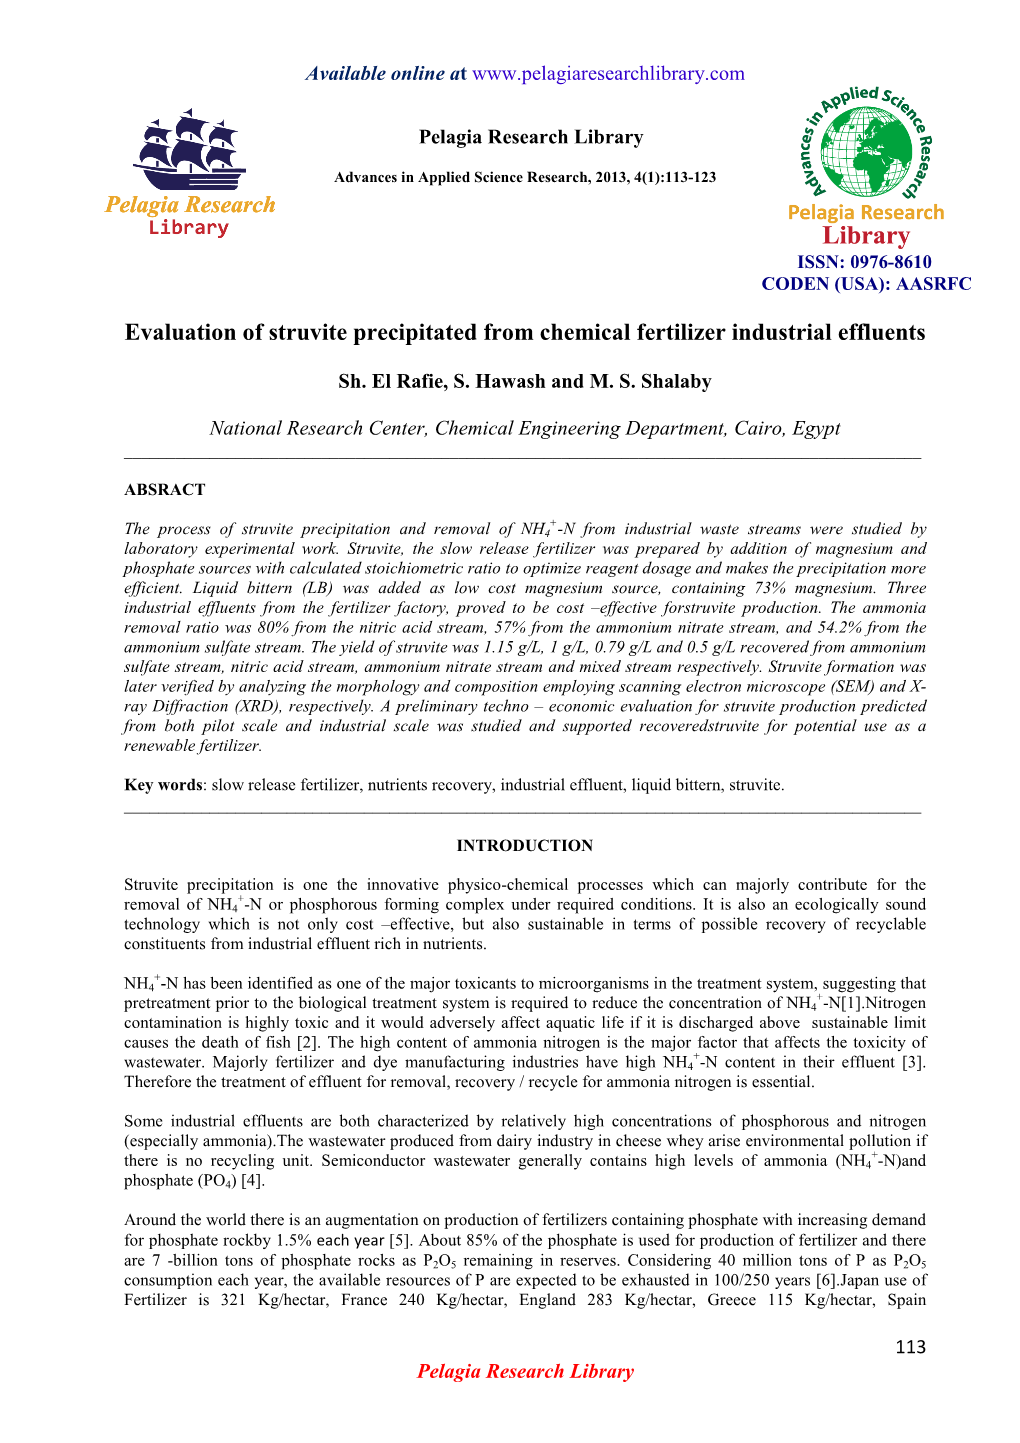 Evaluation of Struvite Precipitated from Chemical Fertilizer Industrial Effluents